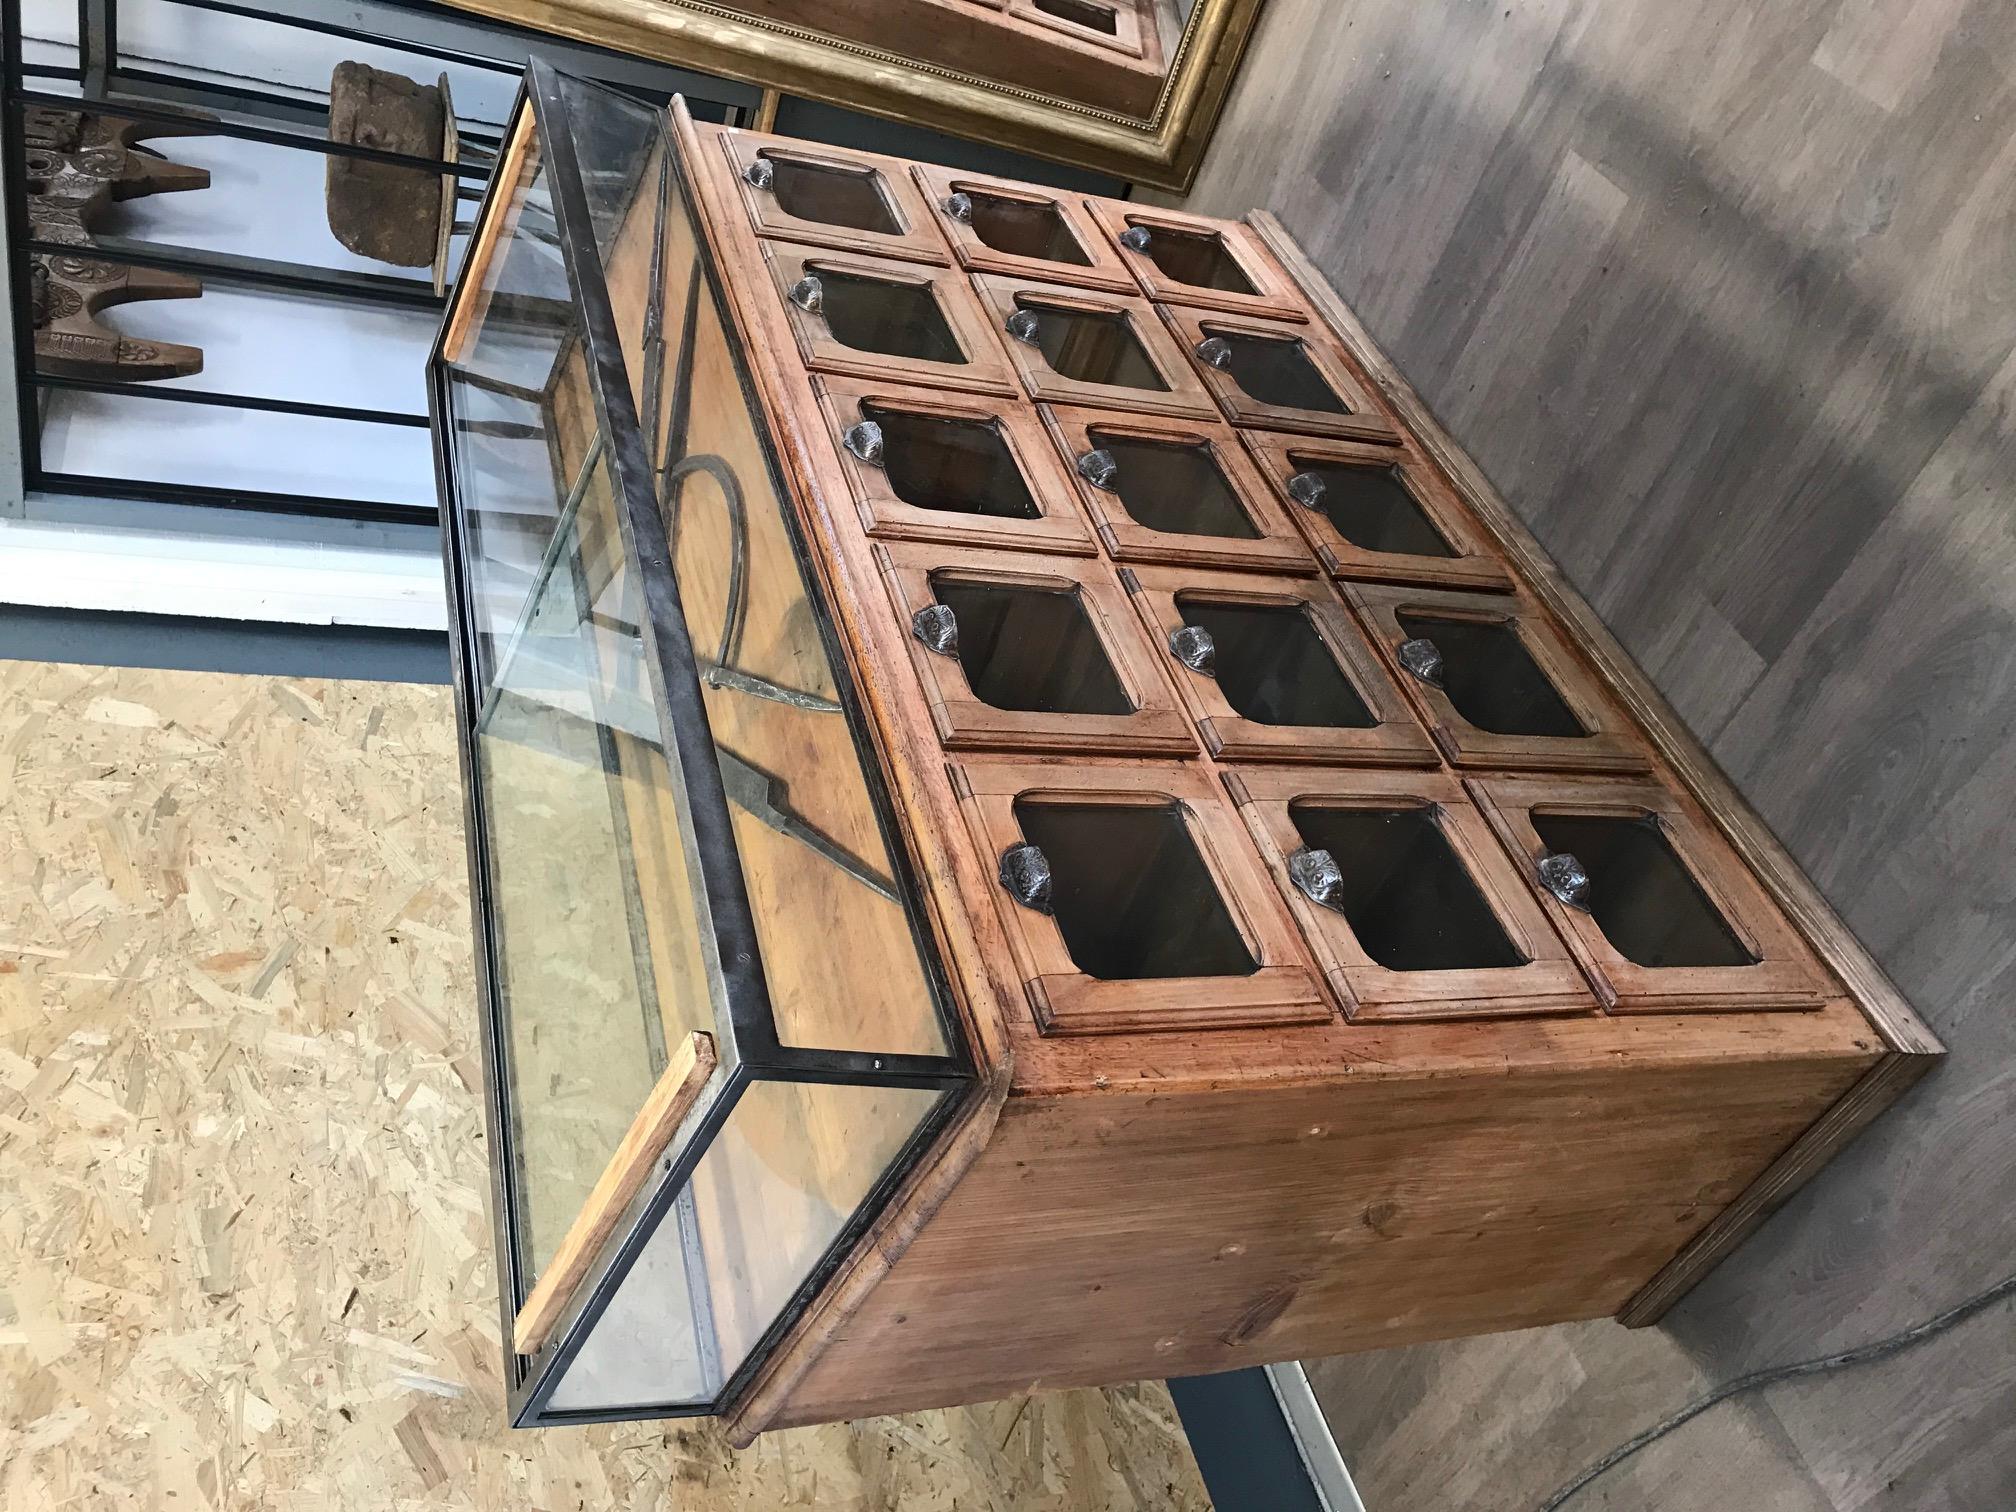 20th century French oak seed chests of drawers from the 1920s.
Fifteen drawers with a glass and the original metal handles.
An opening glass vitrine on the top that can be removable.
Beautiful quality and condition.
Two glass missing on two